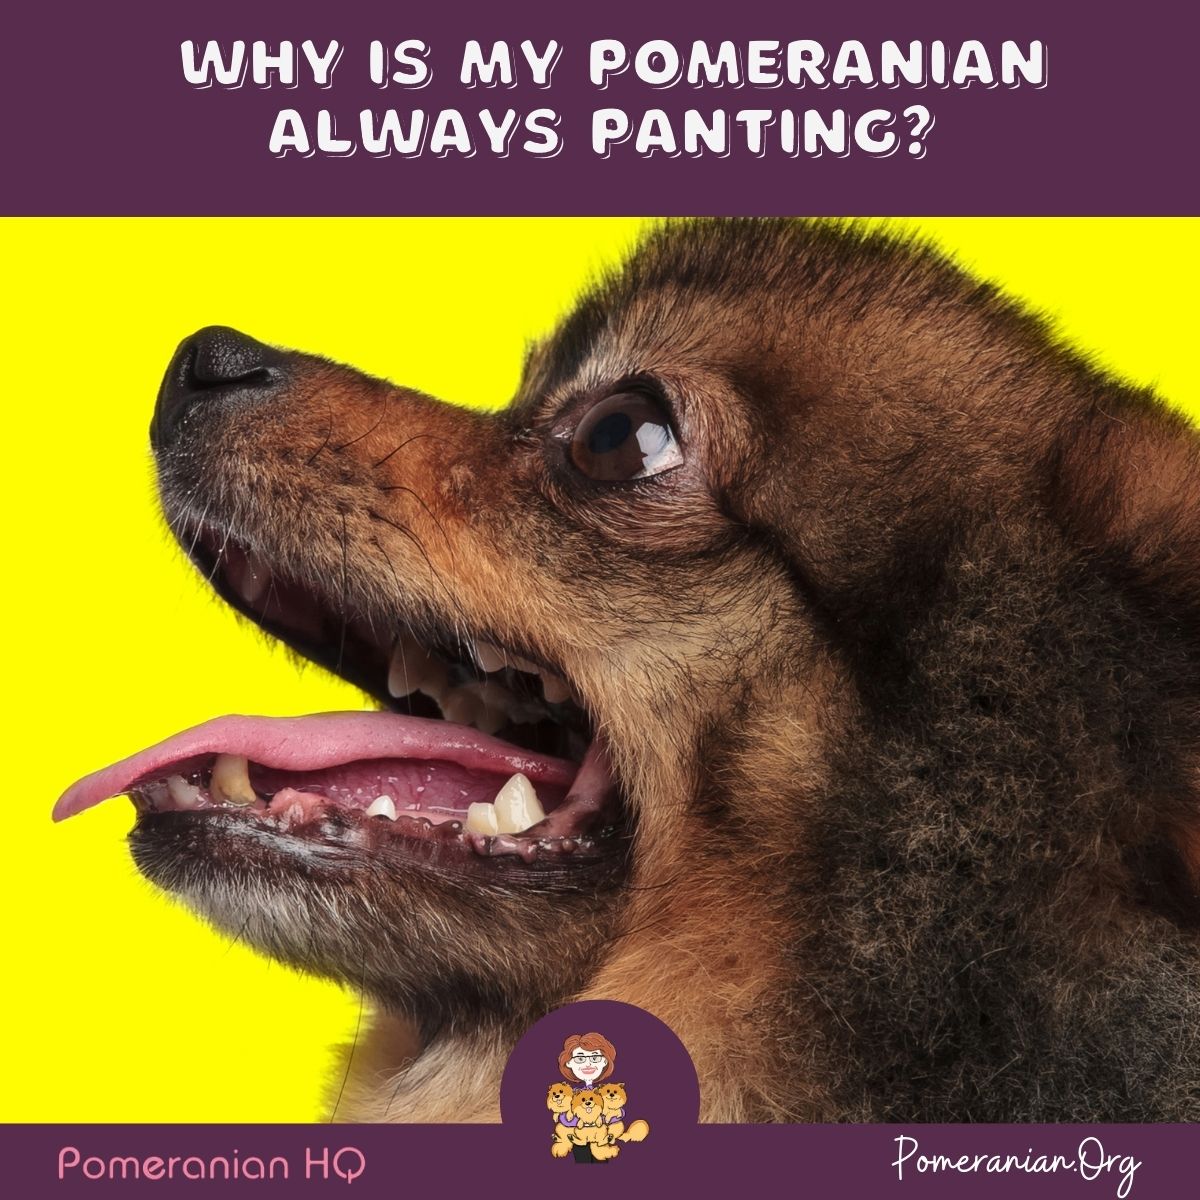 Why Is My Pomeranian Always Panting? Details of Pomeranian Panting Issues